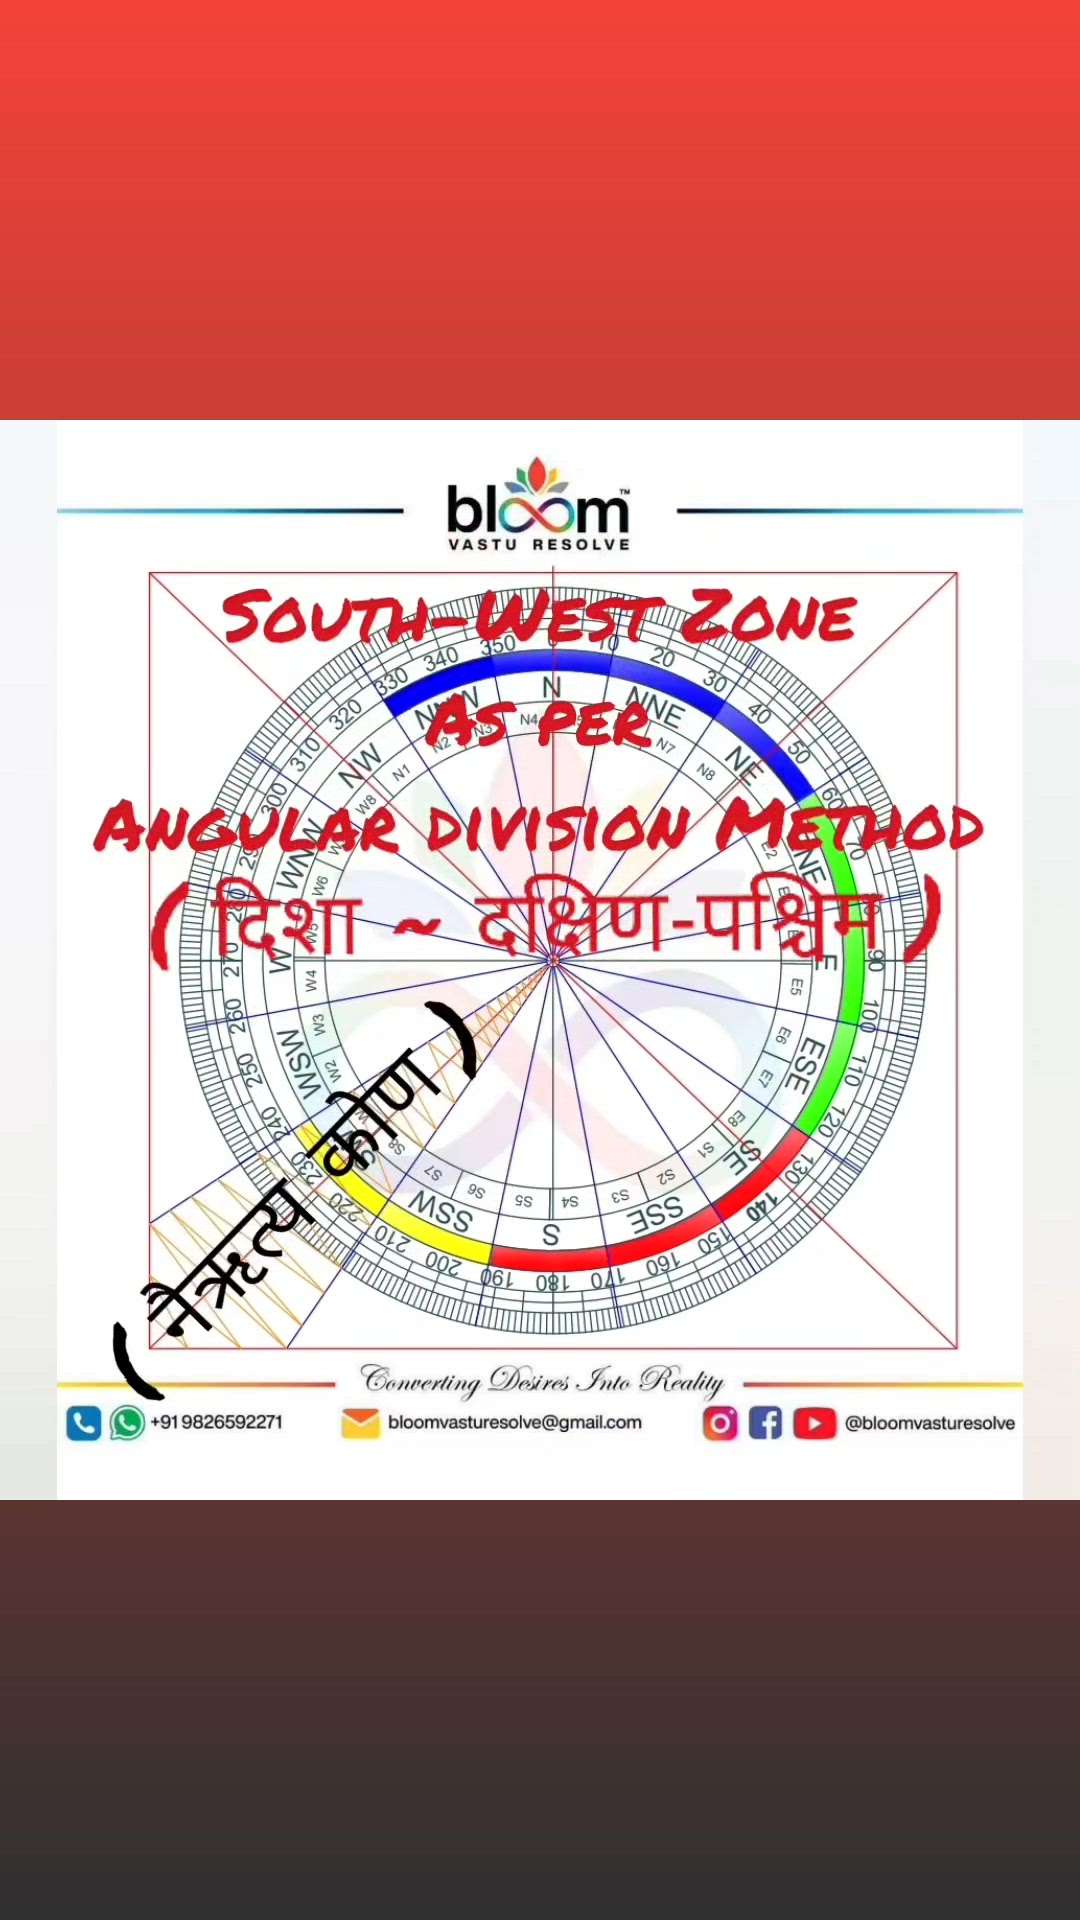 Your queries and comments are always welcome.
For more Vastu please follow @bloomvasturesolve
on YouTube, Instagram & Facebook
.
.
For personal consultation, feel free to contact certified MahaVastu Expert through
M - 9826592271
Or
bloomvasturesolve@gmail.com

#vastu 
#mahavastu #mahavastuexpert
#bloomvasturesolve
#wallpainting 
#wallpaper 
#vastutips 
#swzone